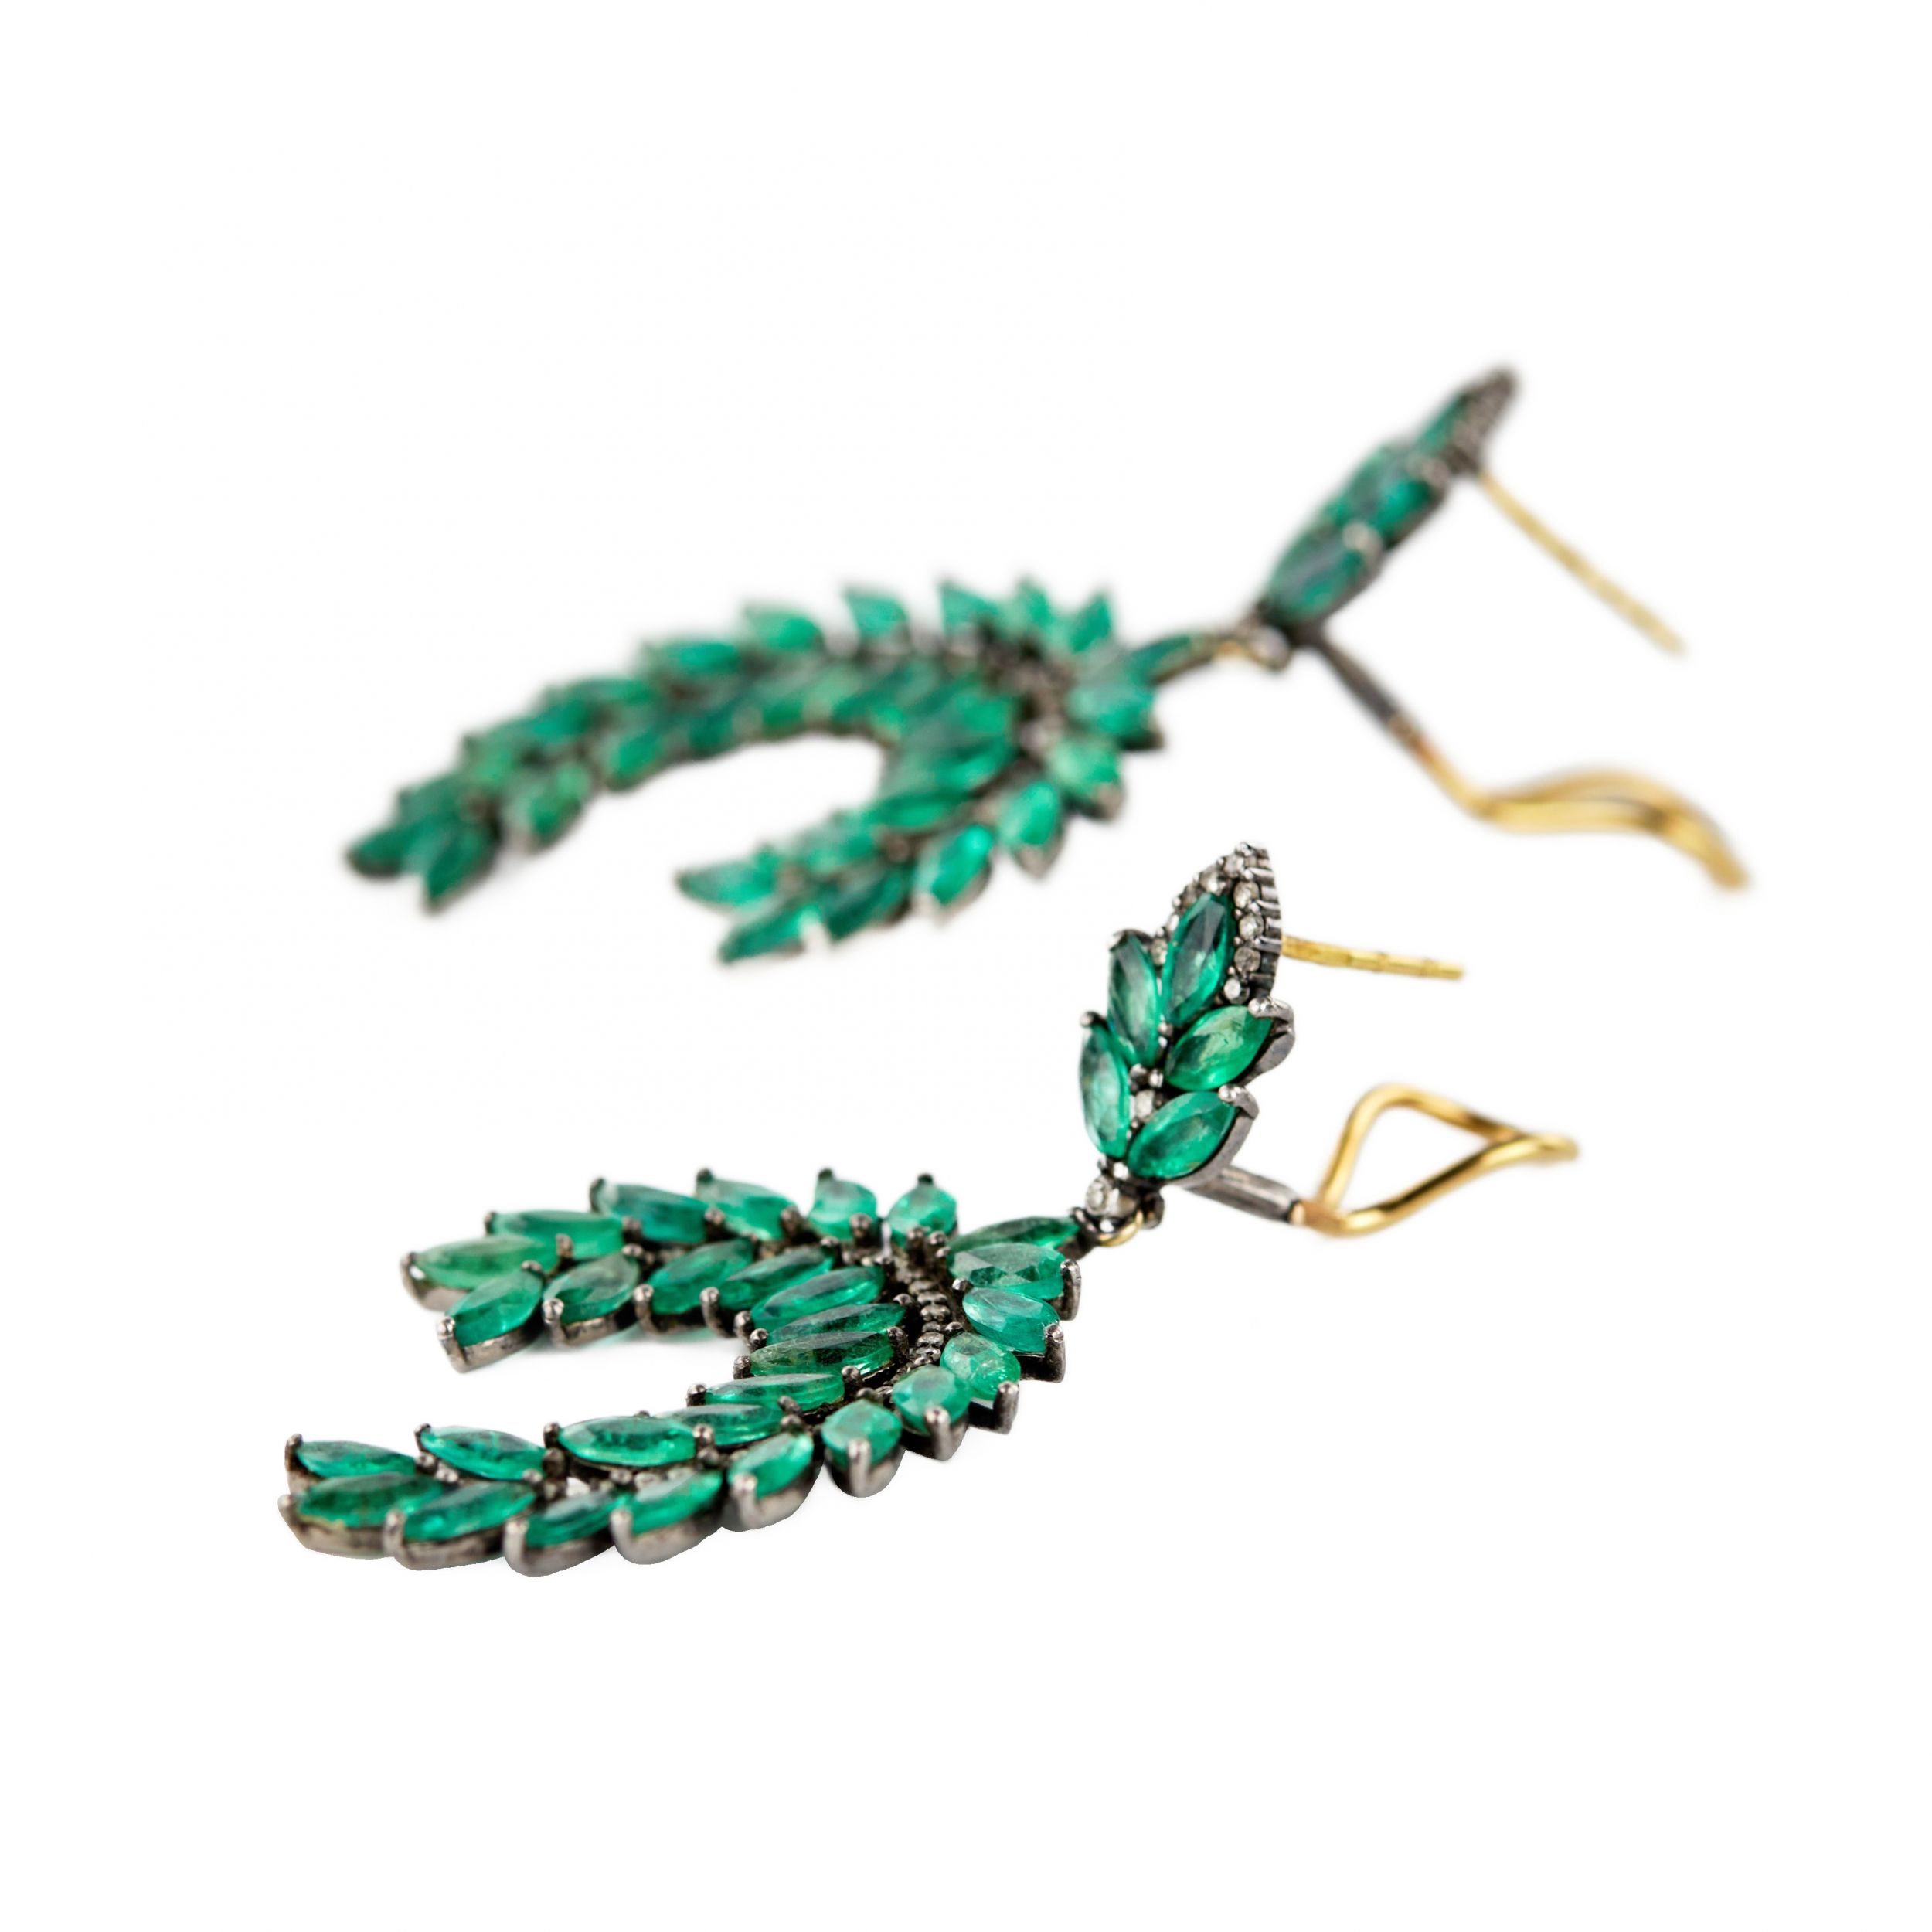 Silver earrings with emeralds and diamonds. - Image 10 of 14